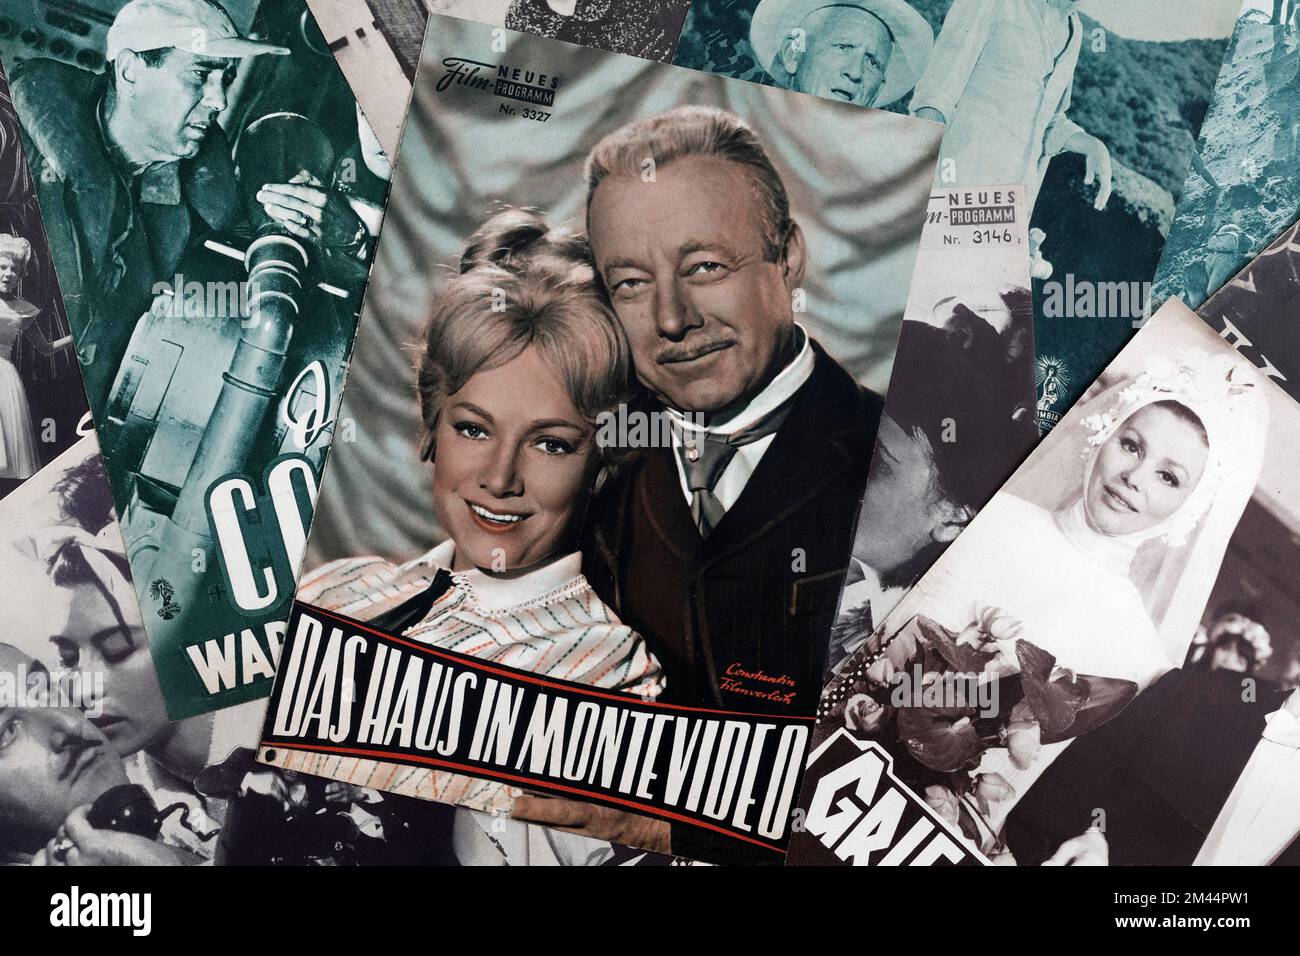 German cinema film Das Haus in Montevideo with Heinz Ruehmann and Ruth Leuwerik from 1963, front page of a printed programme, Germany Stock Photo